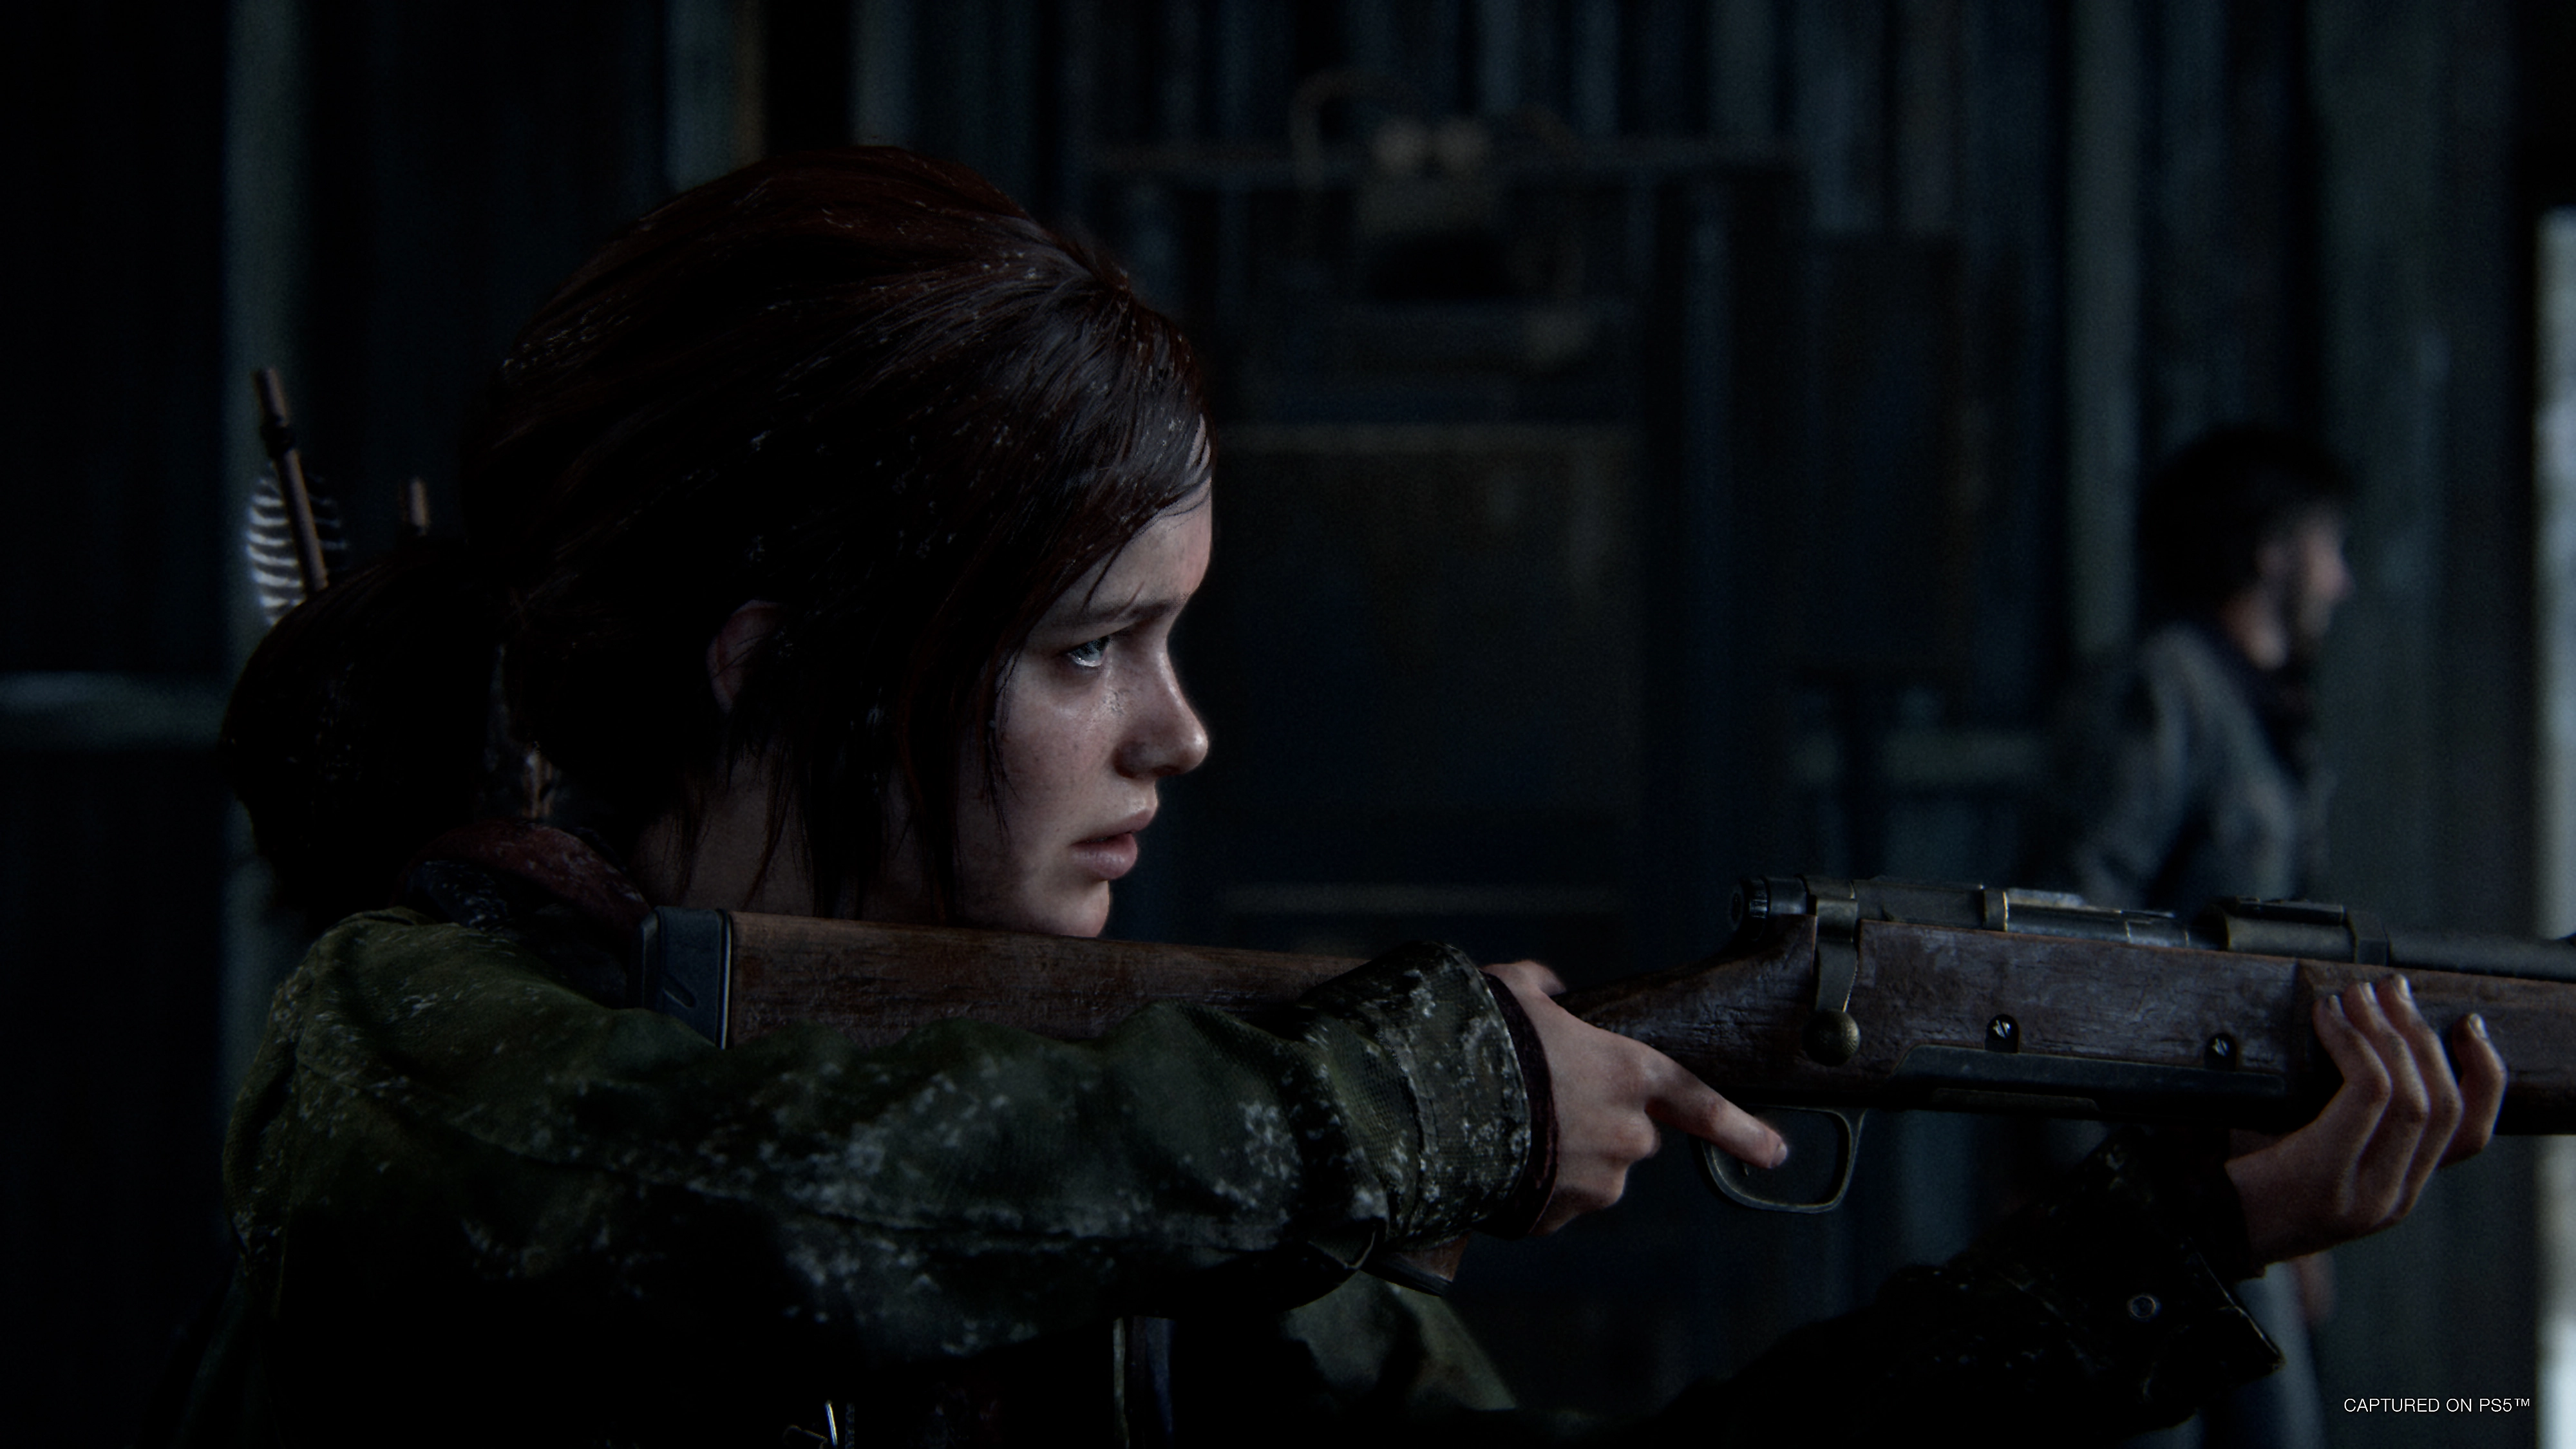 AMD graphics cards could soon come with a free copy of The Last of Us Part 1